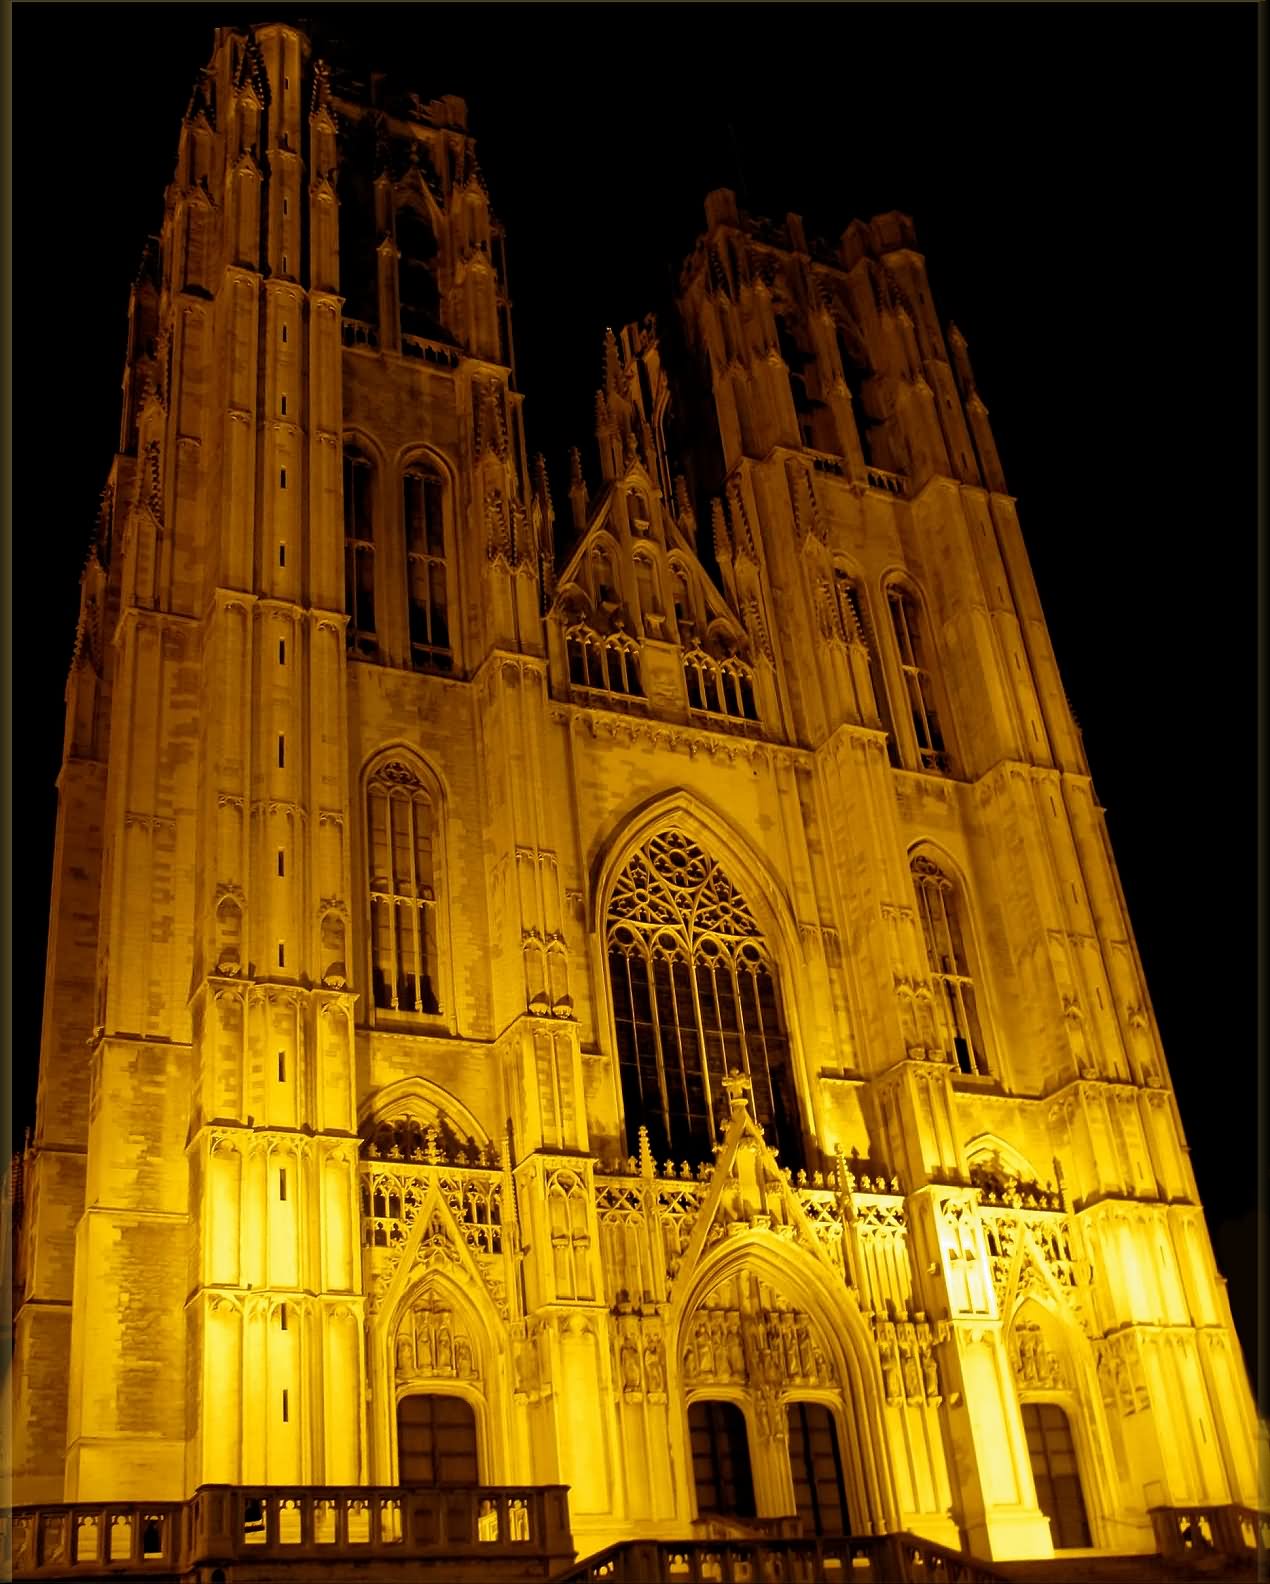 12 Incredible Night View Images And Photos Of The Cathedral of St. Michael and St. Gudula In Brussels, Belgium